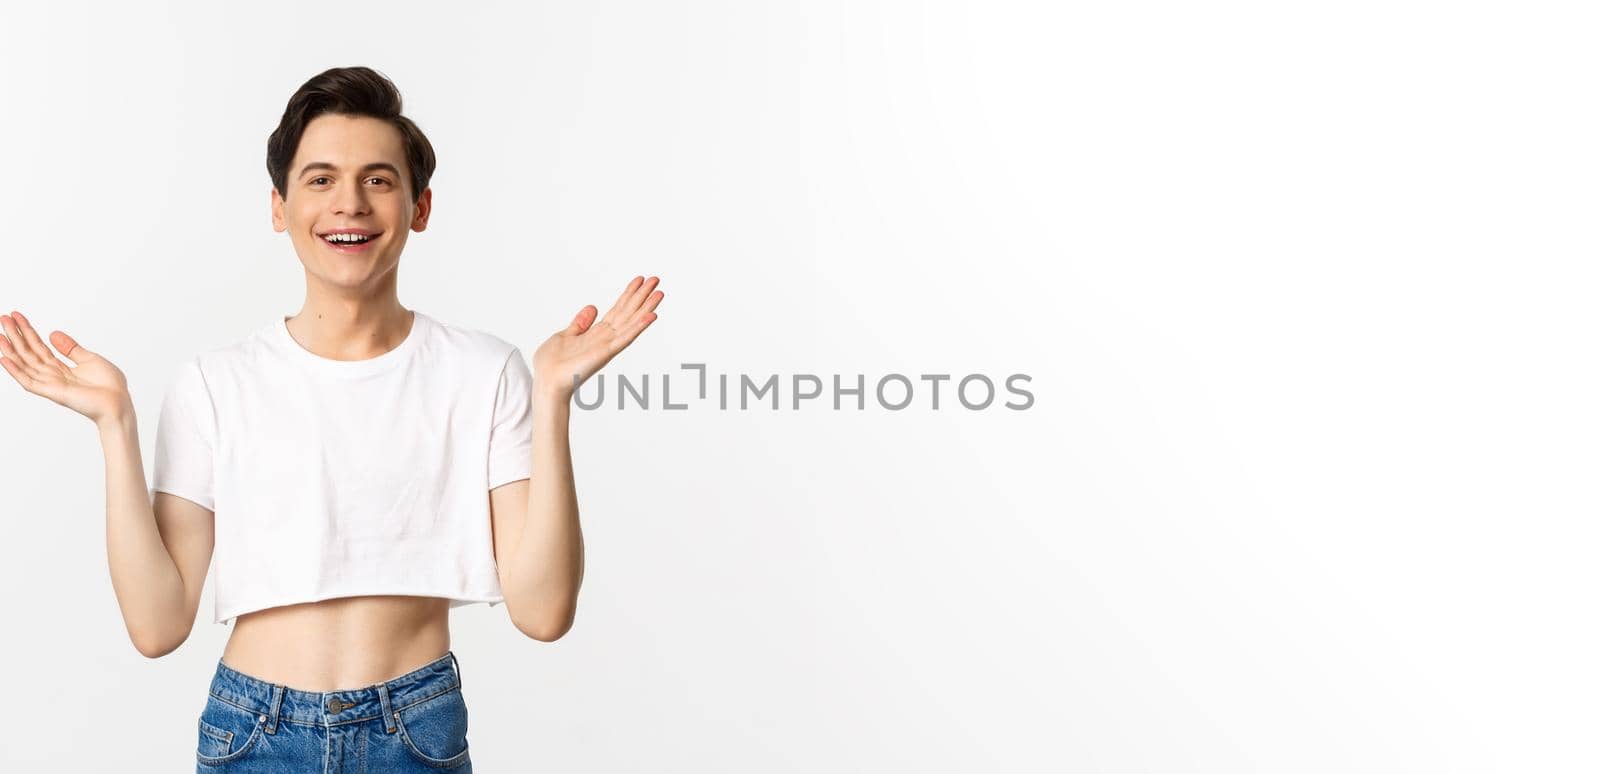 Lgbtq and pride concept. Happy and satisfied young gay man in crop top clapping hands proud, smiling at camera, standing over white background.